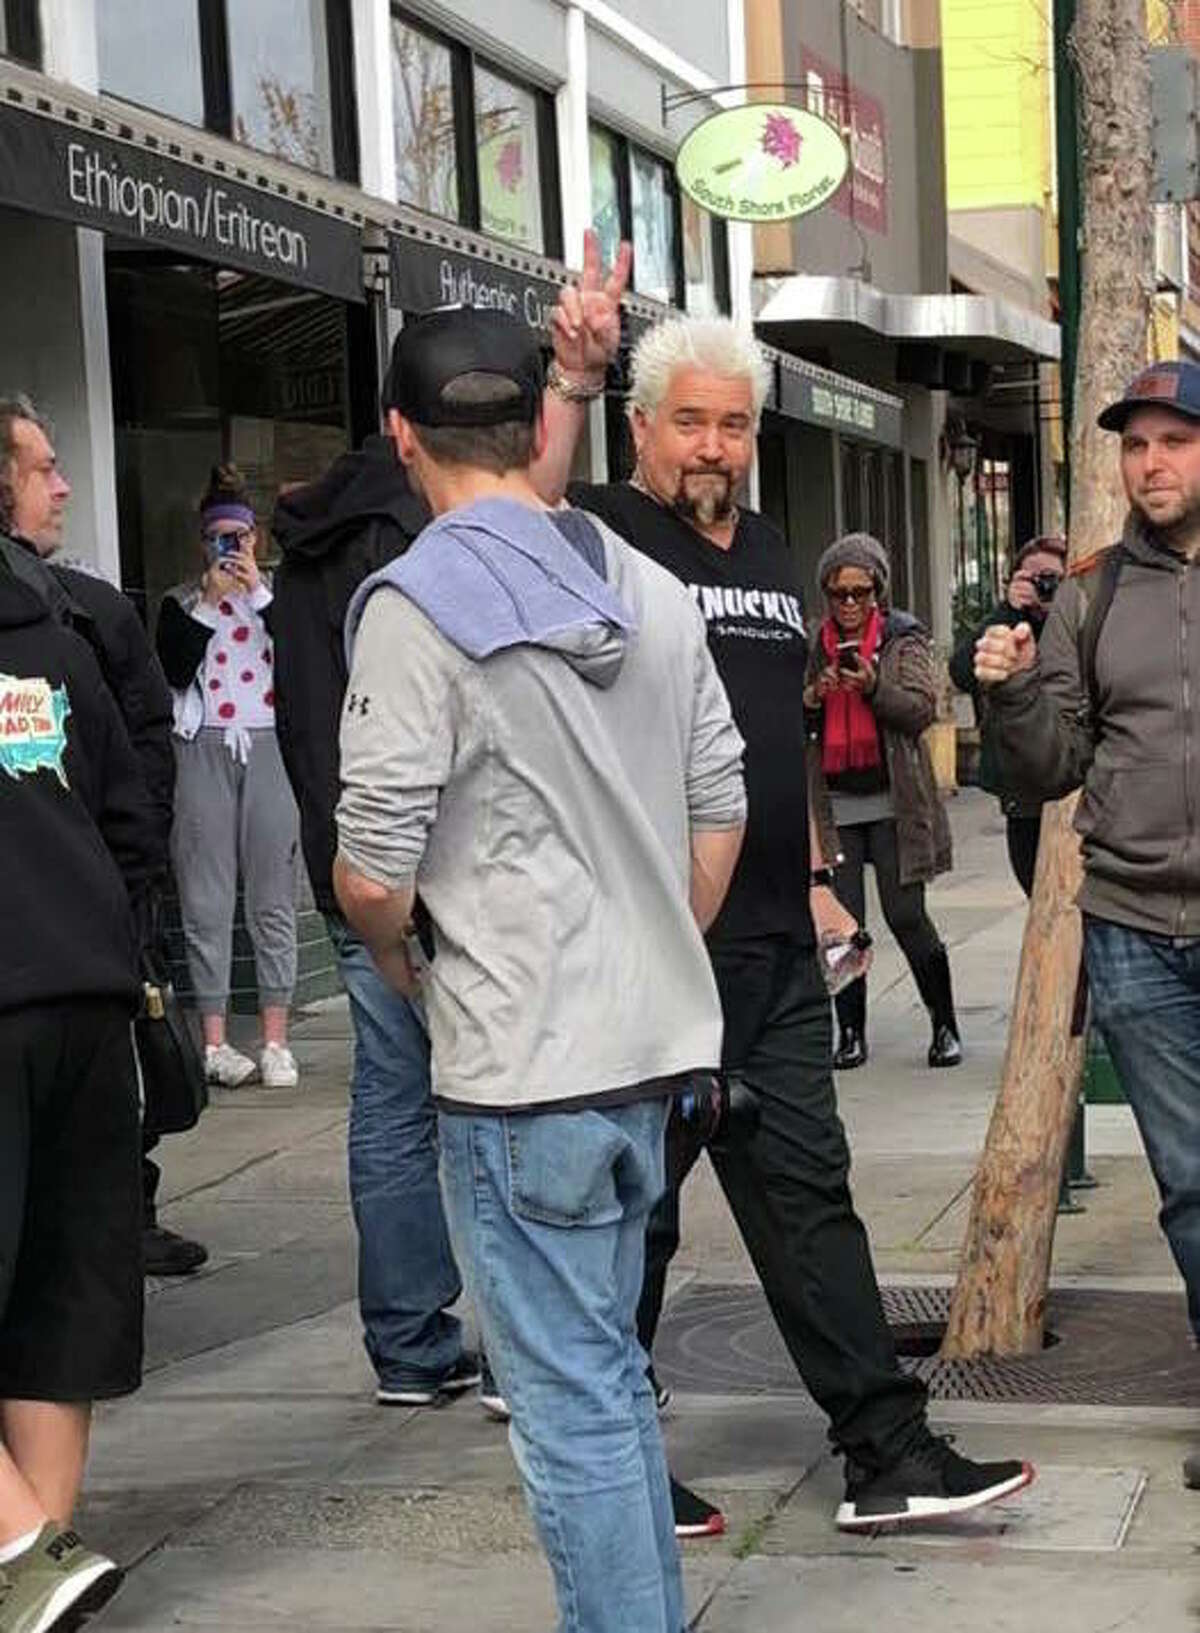 Chef and Santa Rosa resident Guy Fieri was "keepin it local" this week, and visited a few local spots while filming "Diners, Drive-Ins and Dives." Pictured is Fieri leaving Scolari's in Alameda.